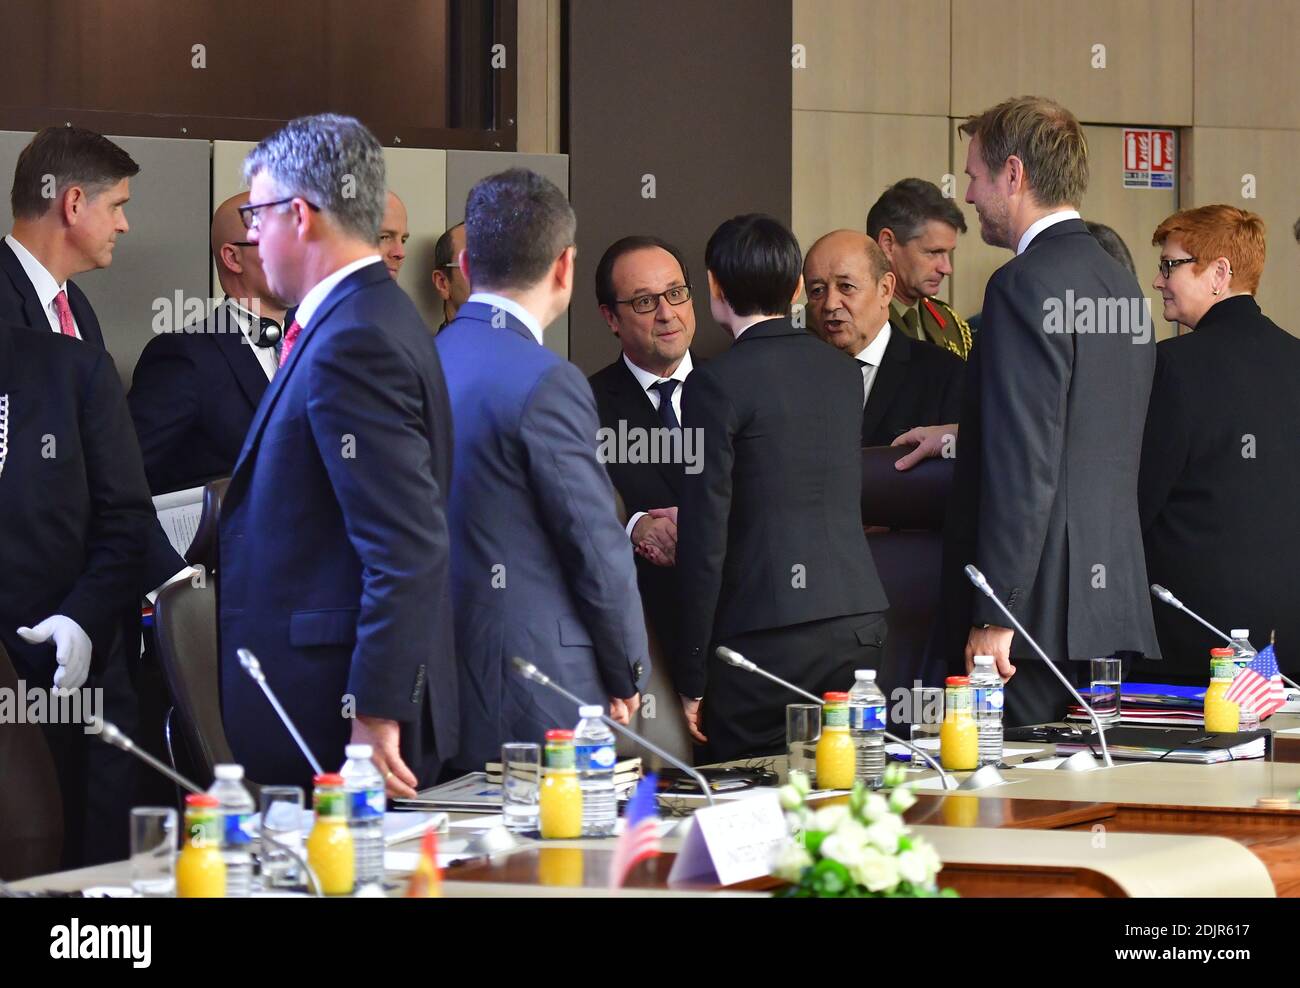 French President Francois Hollande arrives for the opening of a Counter-ISIL Coalition Meeting hosted by French Minister of Defence Jean-Yves Le Drian and attended by the Defence Ministers of the Coalition in Iraq and Syria, Ashton Carter (USA), Michael Fallon (UK), Jeanine Hennis-Plasschaert (Netherlands), Marise Payne (Australia), Roberta Pinotti (Italy), Ursula Von Der Leyen (Germany), Pedro Morenes (Spain), Peter Christensen (Denmark), Ine Marie Eriksen Soreide (Norway), Steven Vandeput (Belgium), Gerry Brownlee (New Zealand) and Harjit Sajjan (Canada), held at the French Ministry of Defen Stock Photo